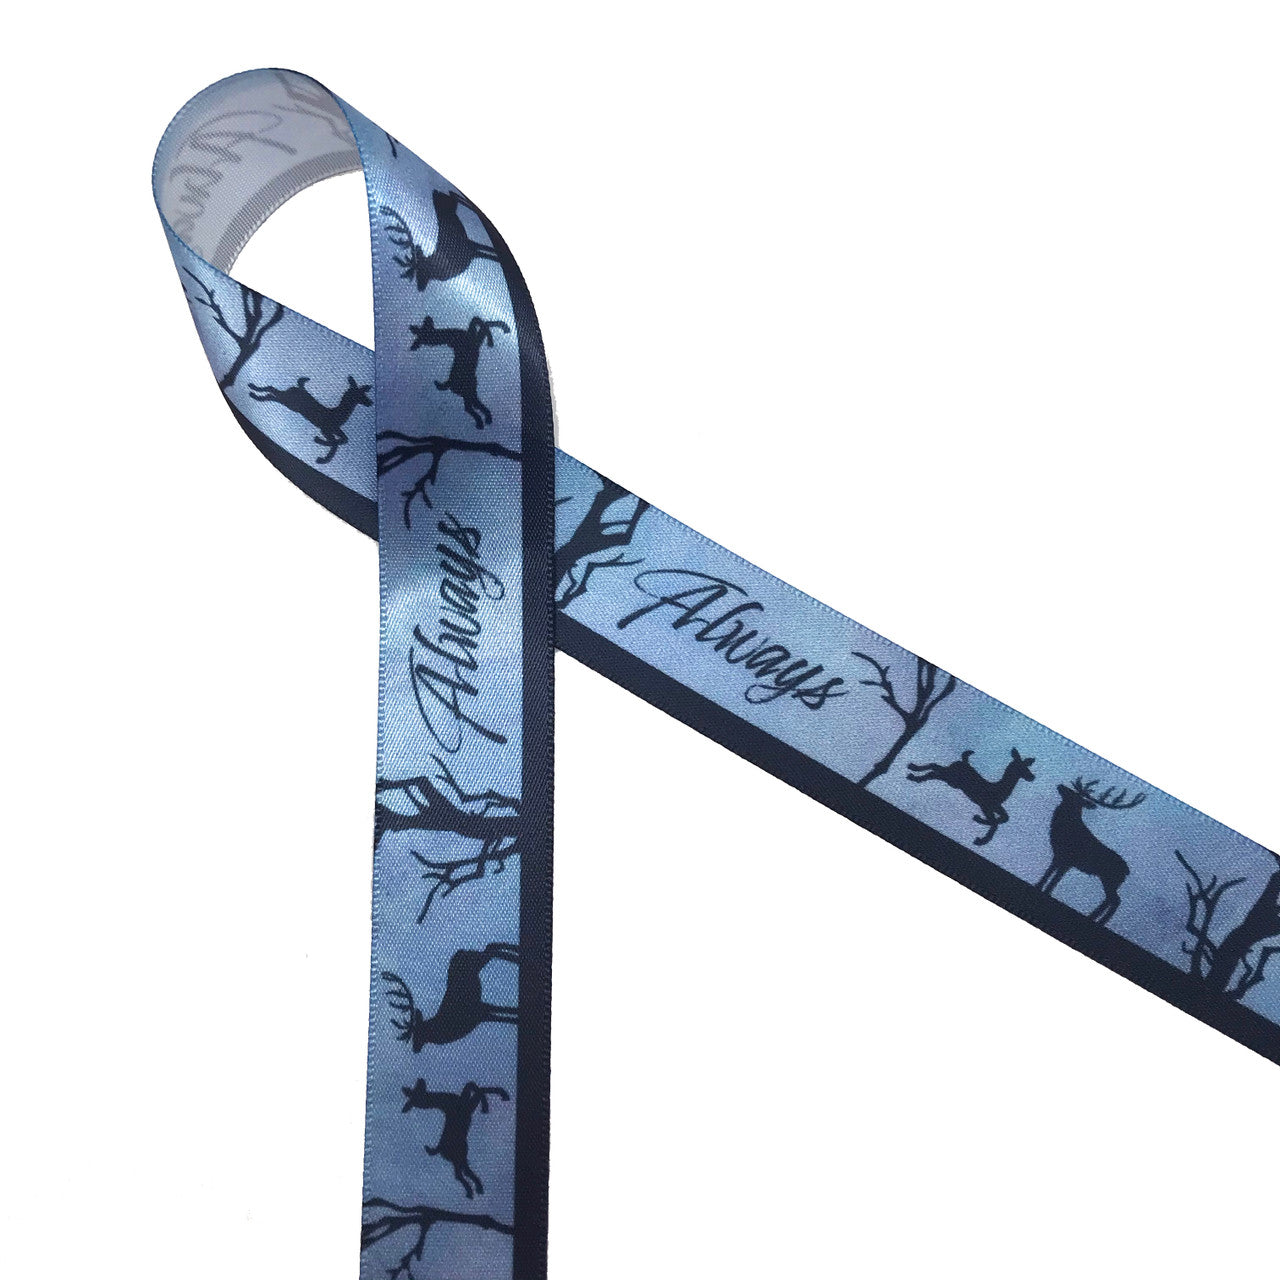 Always ribbon with doe, buck and tree in black silhouette on a blue background This is the ideal ribbon for any Wizard themed wedding party or event! Our ribbon is designed and printed in the USA